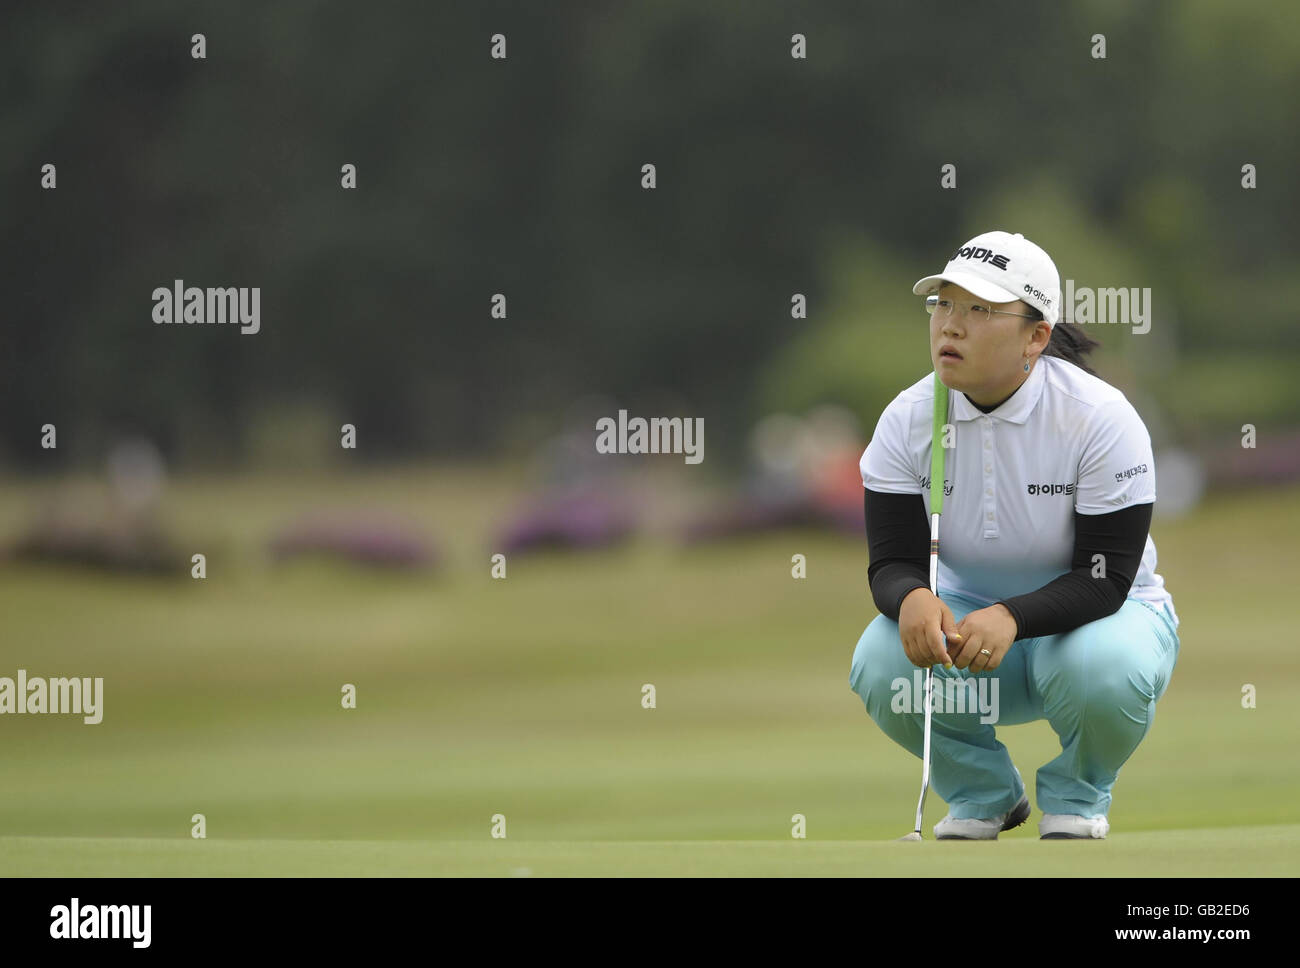 Joint leader South Korea's Ji-Yai Shin watches her playing partners bunker shot as she waits to putt for birdie on the 18th during Round Two of the Ricoh Women's British Open at Sunningdale Golf Club, Berkshire. Stock Photo